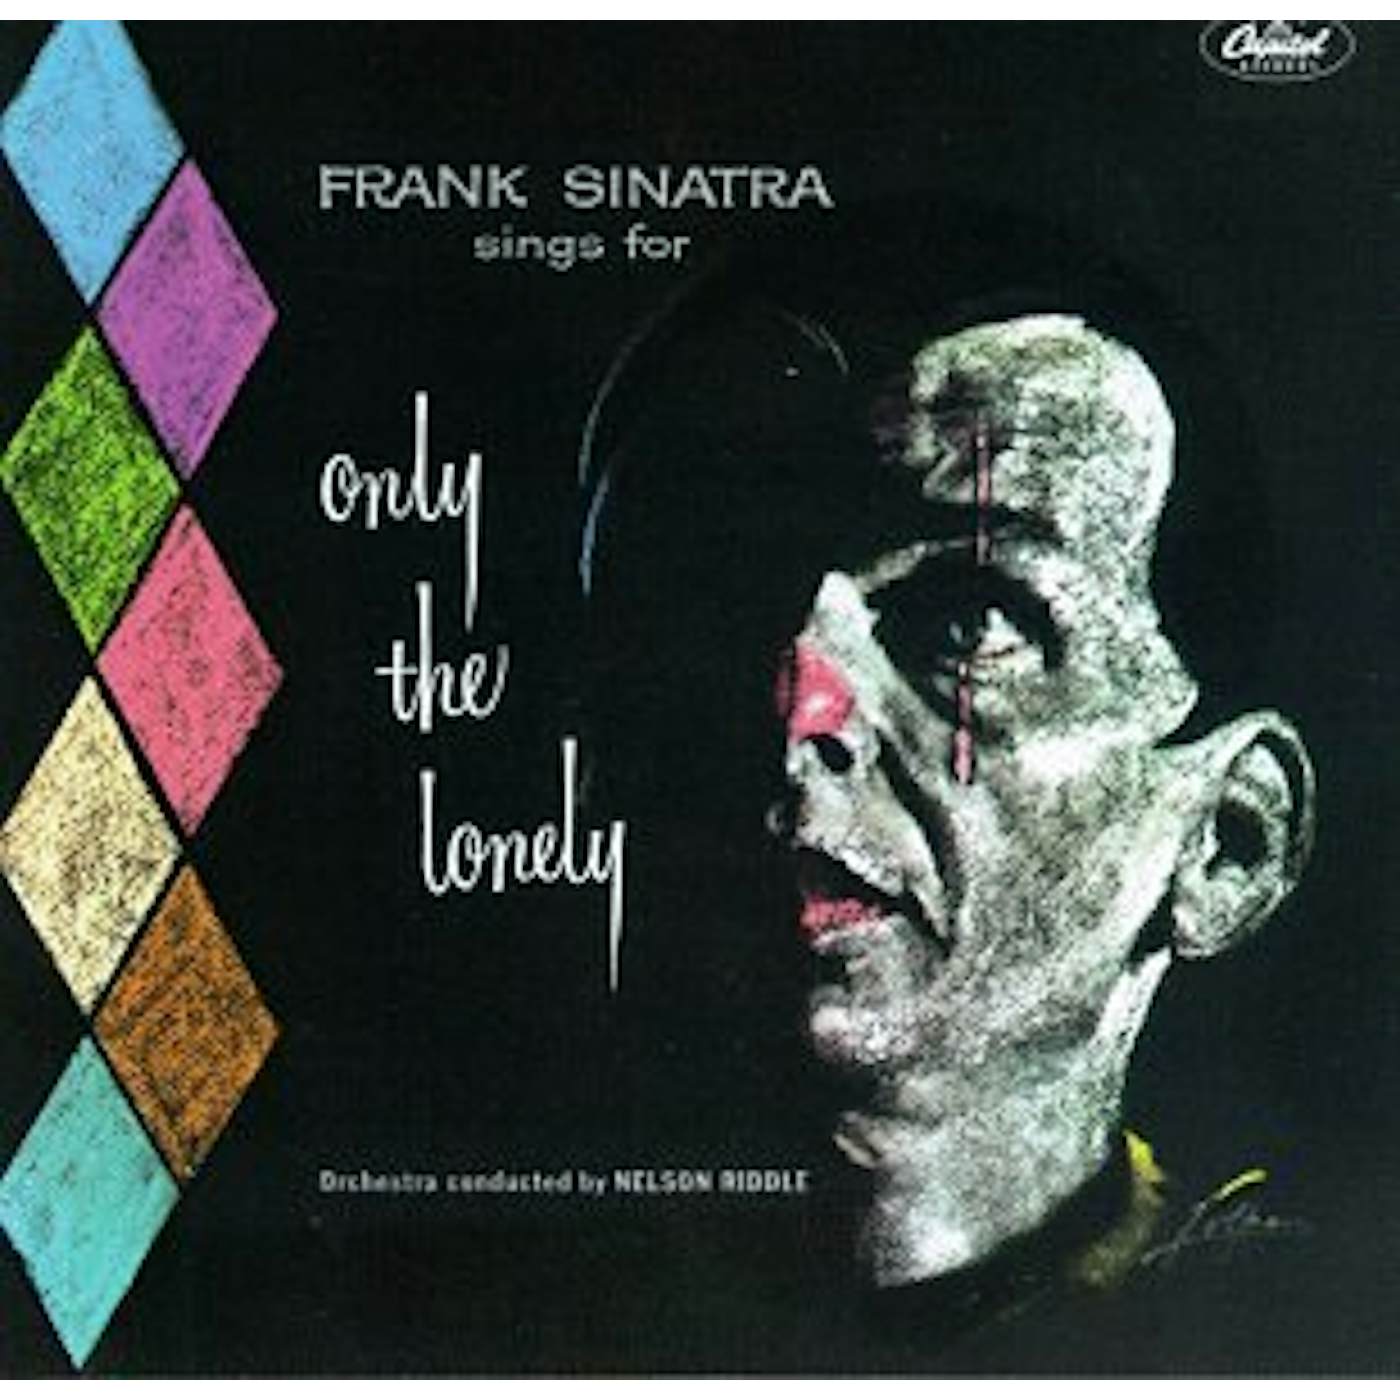 Frank Sinatra ONLY THE LONELY CD